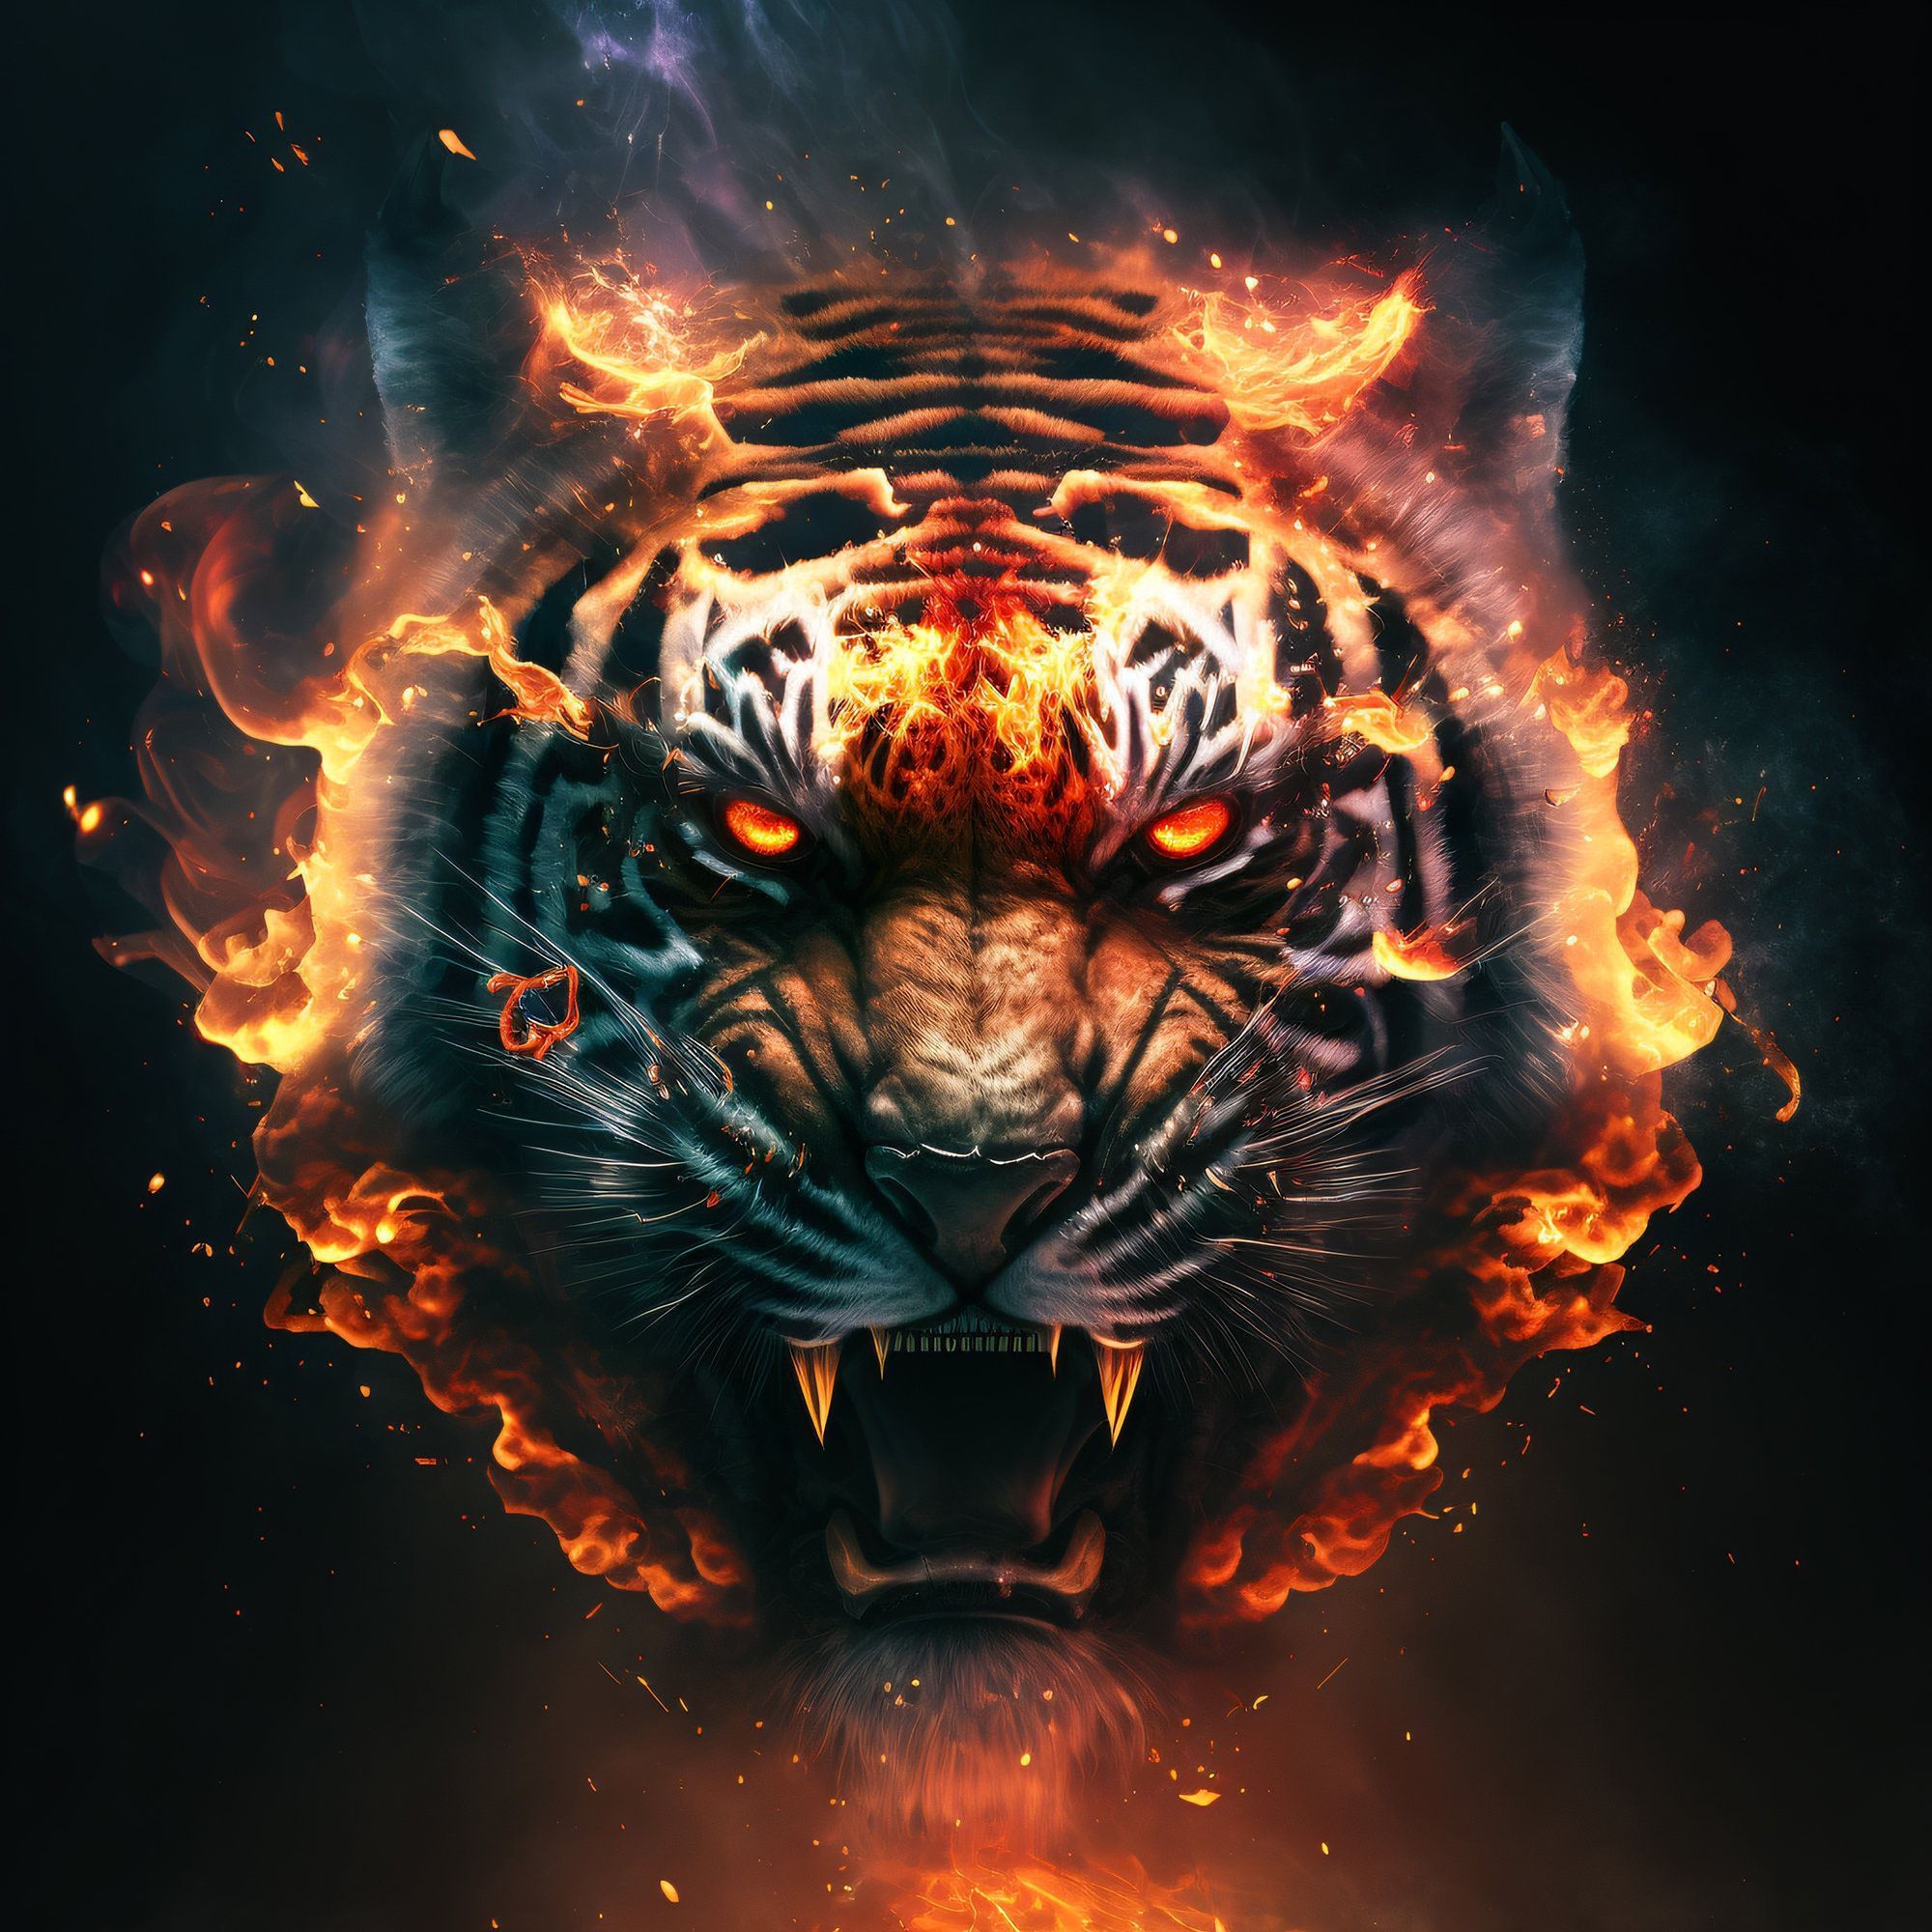 Epic Cinematic Portrait of Sleekly Chiseled Tiger Instant